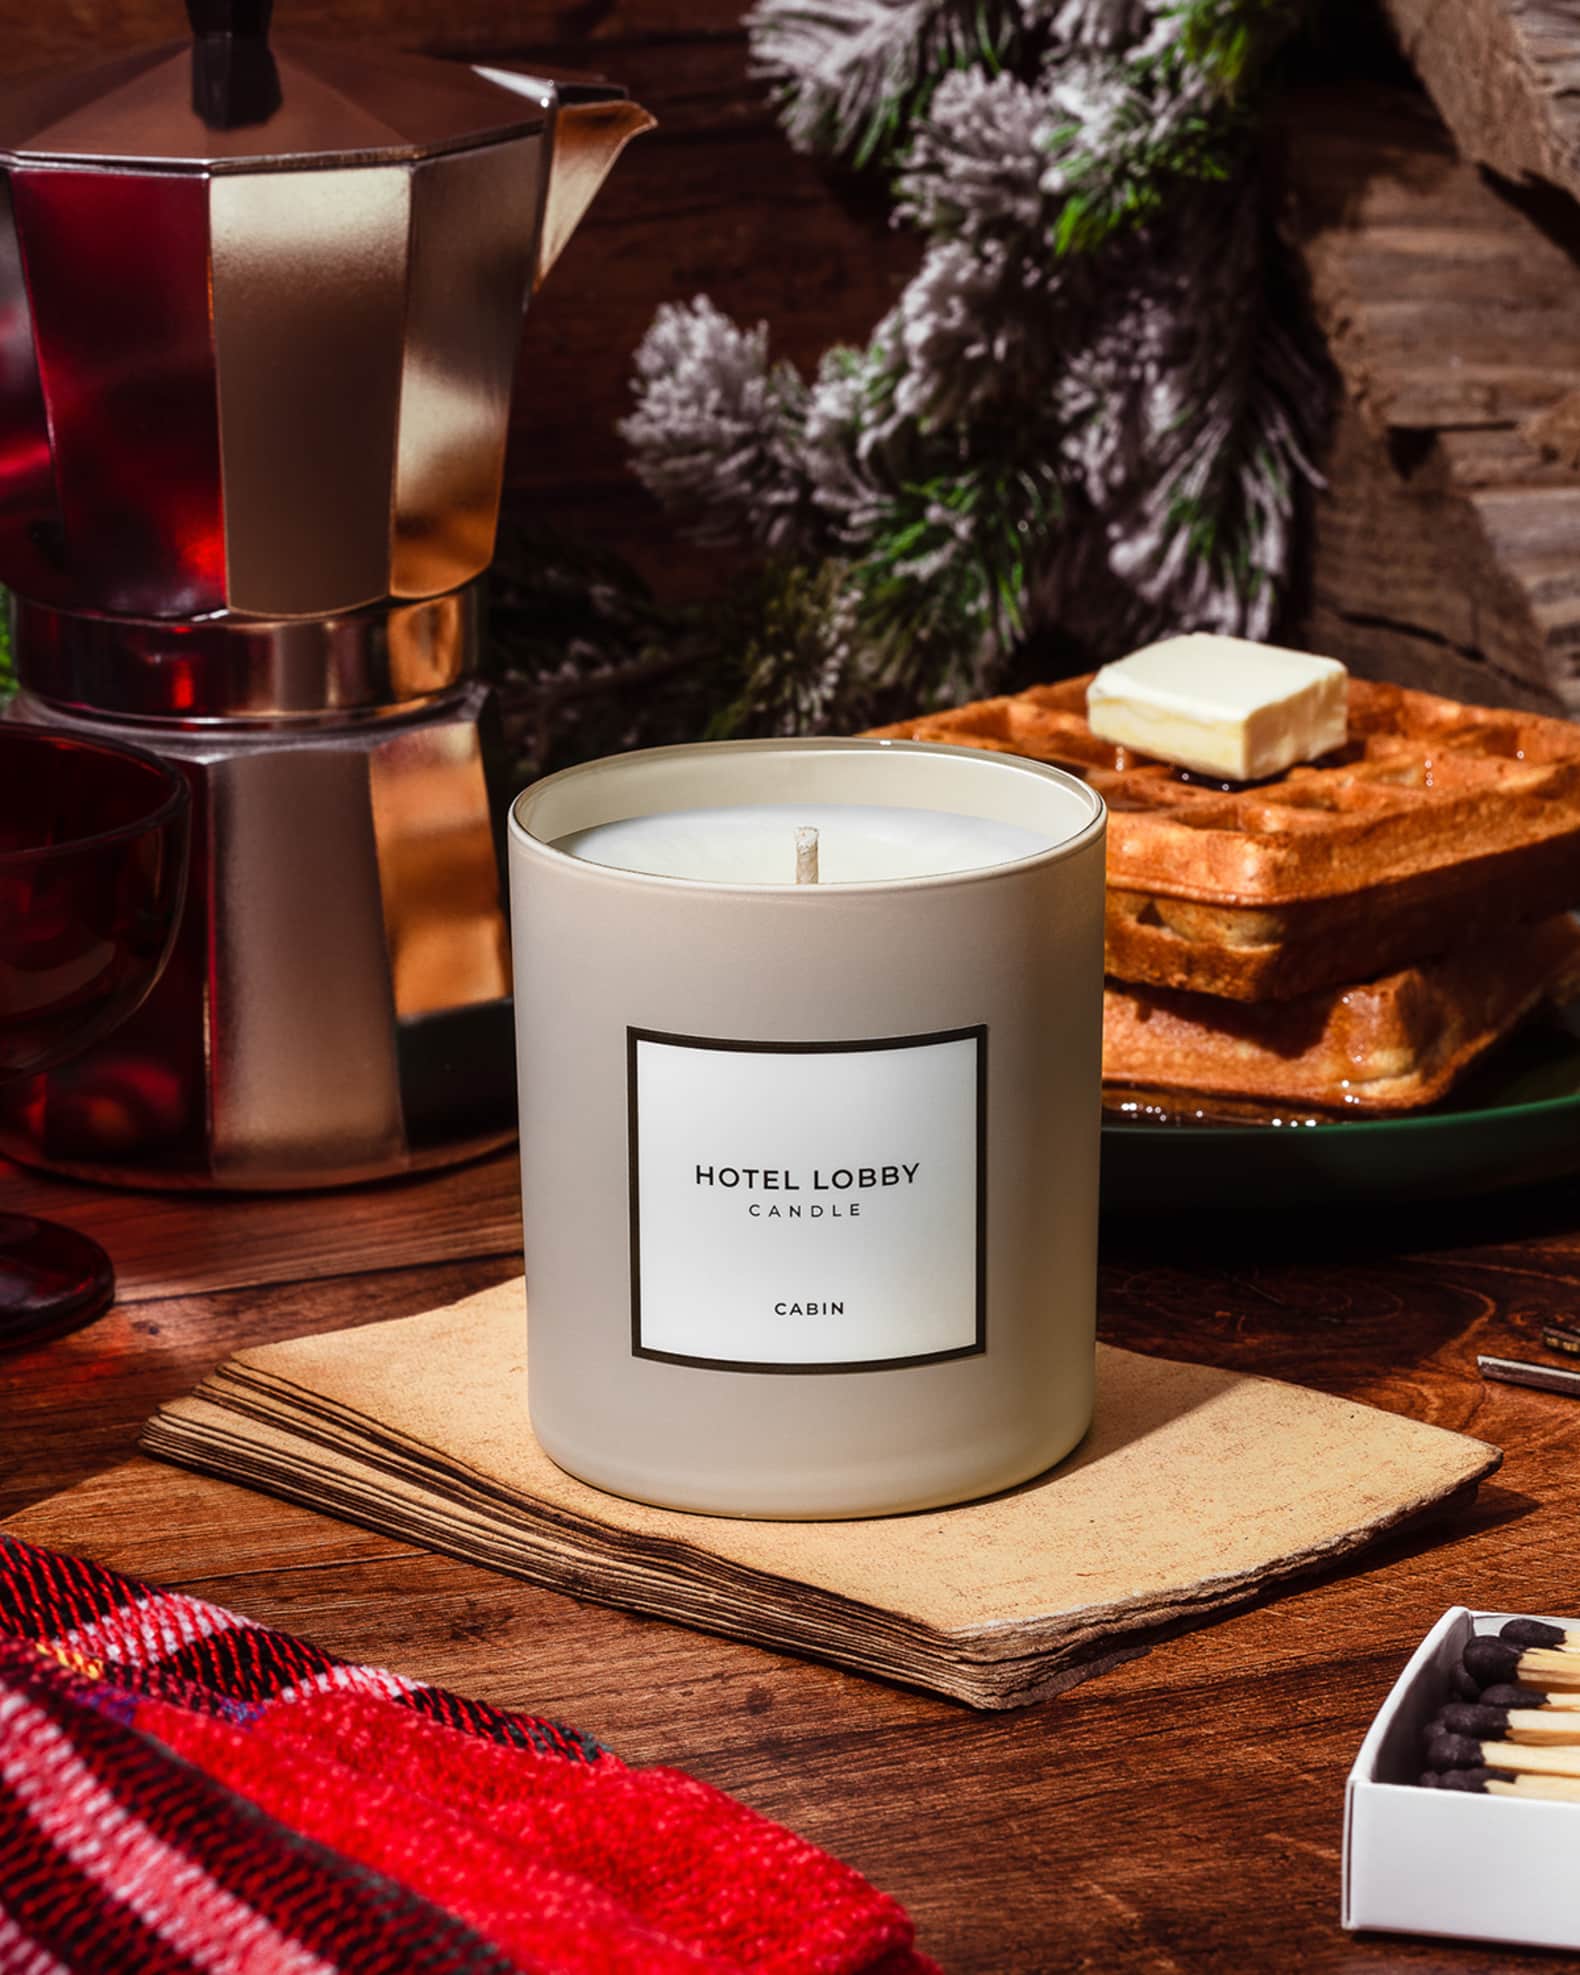 Hotel Lobby Candle 9.75 oz. Cabin Candle